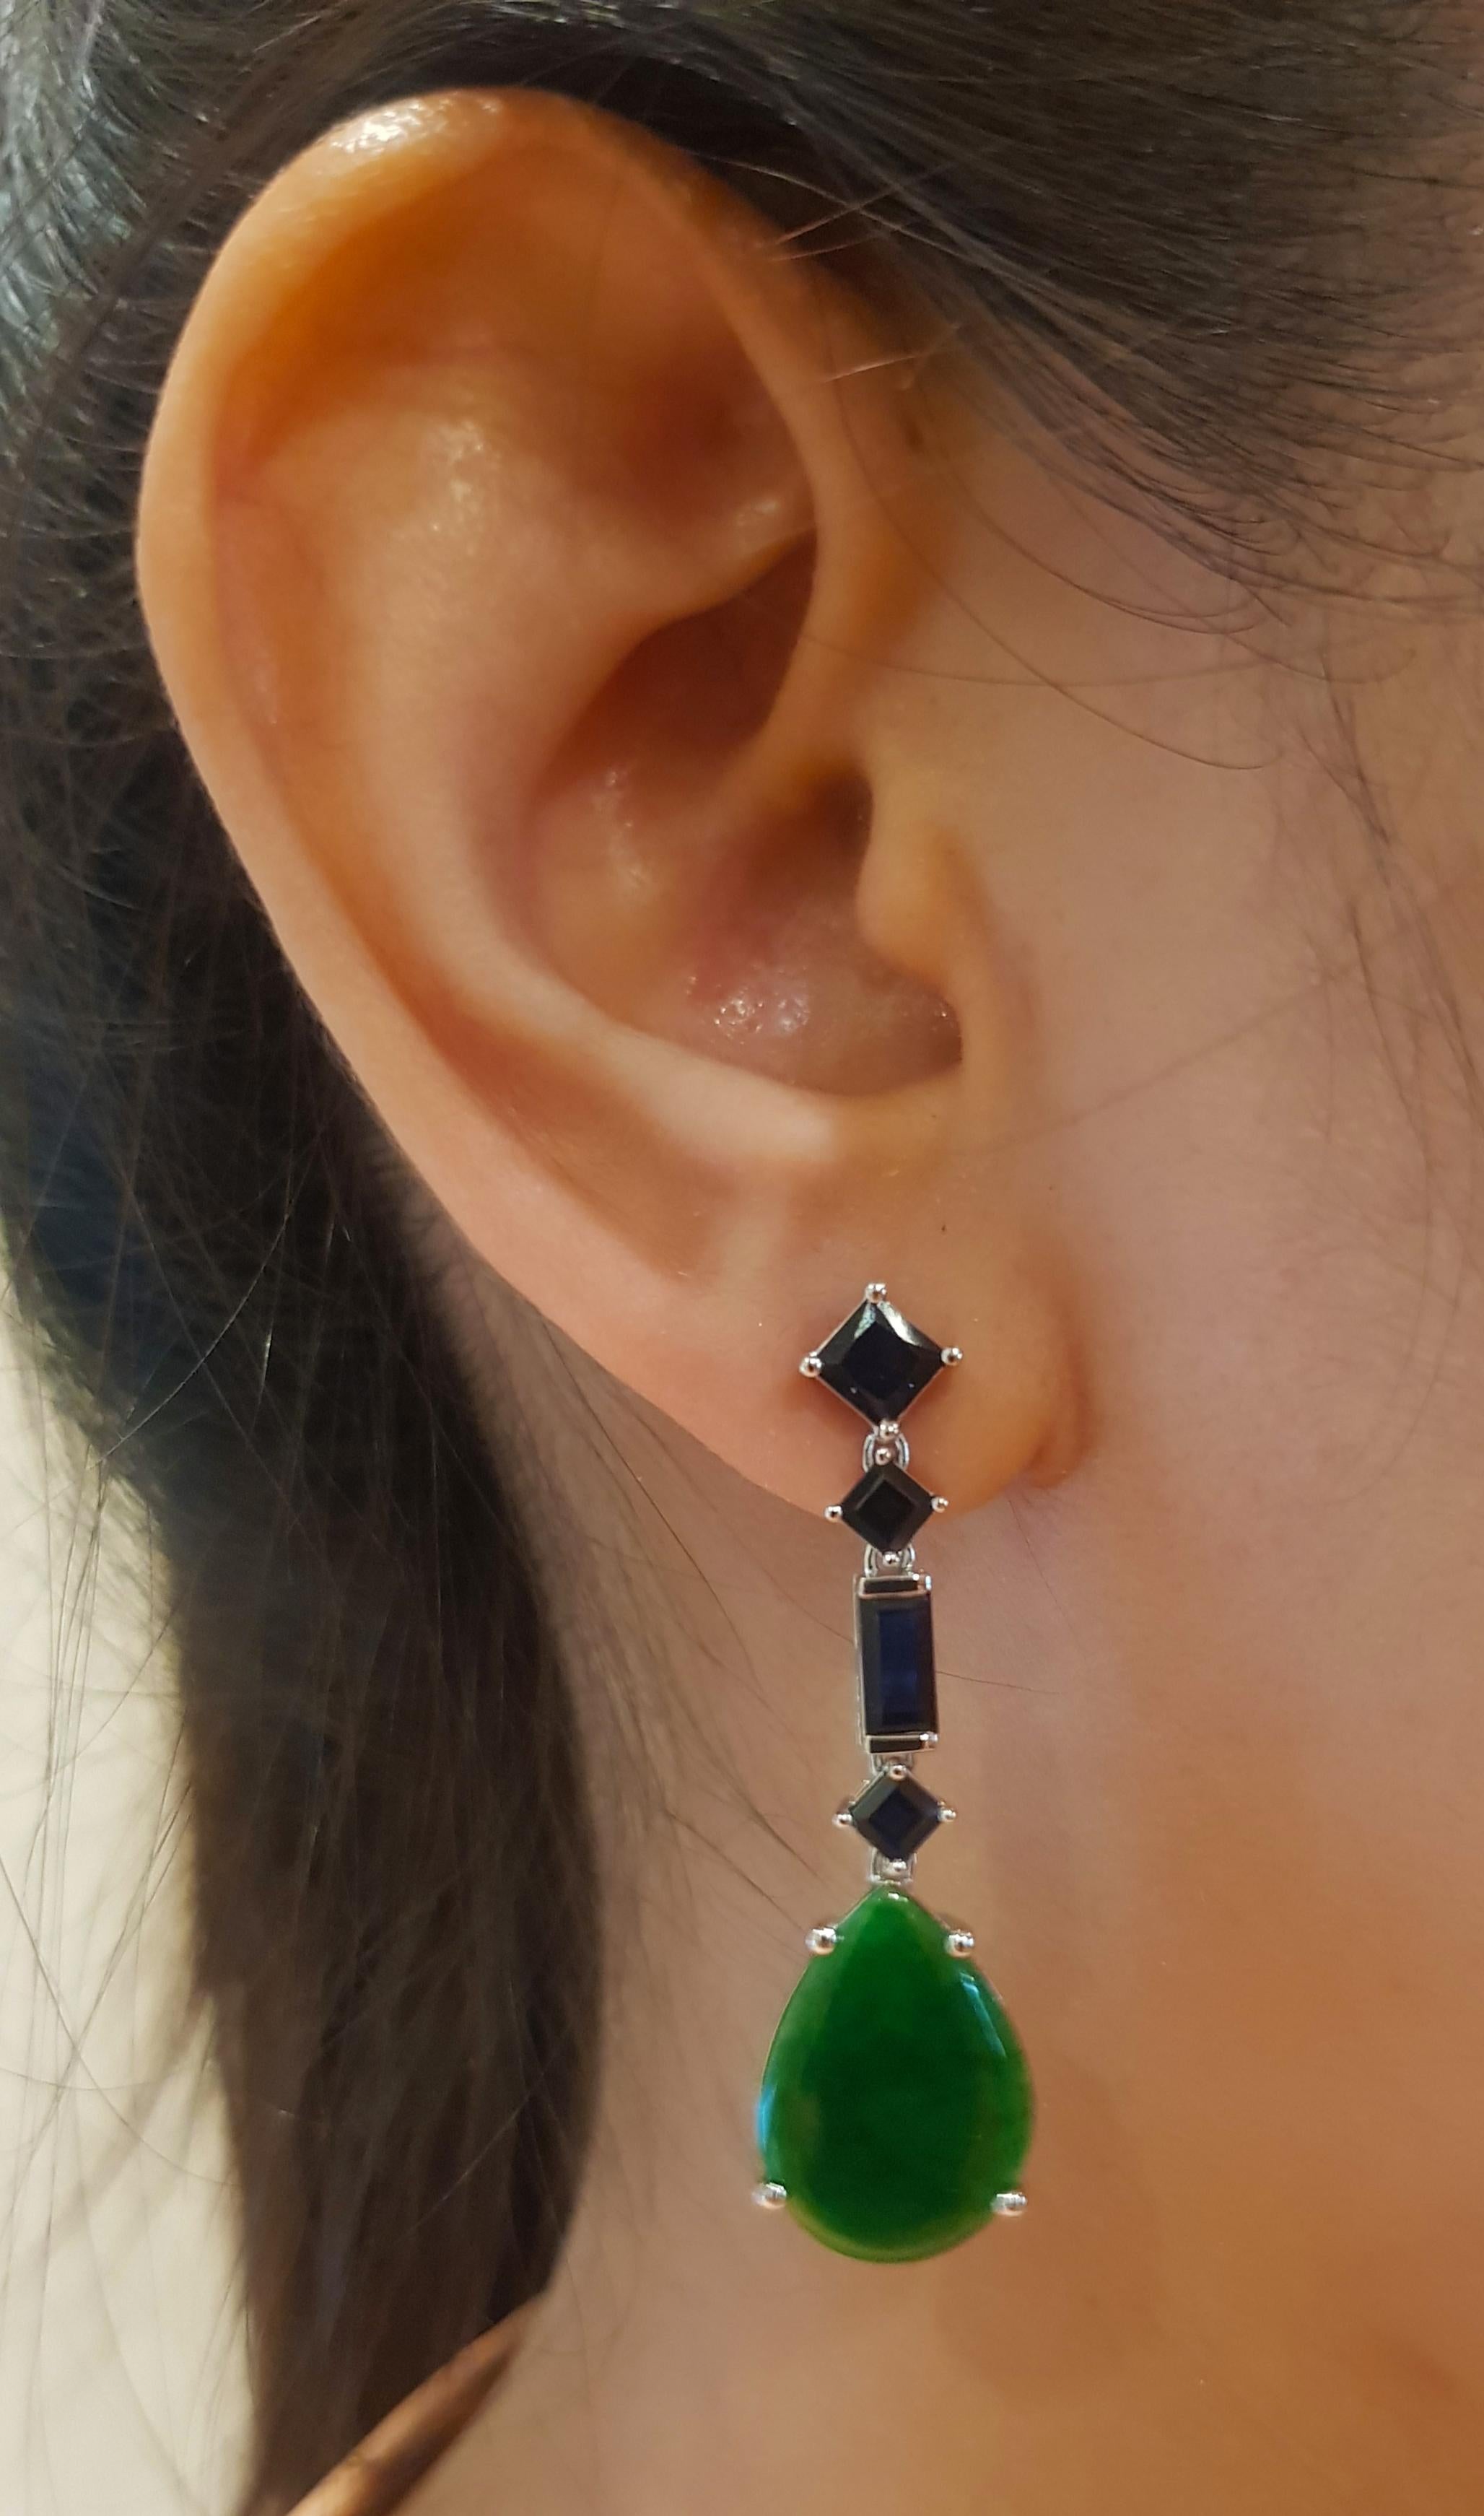 Jade 5.46 carats with Blue Sapphire 3.49 carats Earrings set in 18K White Gold Settings

Width:  1.2 cm 
Length: 4.2 cm
Total Weight: 8.7 grams


